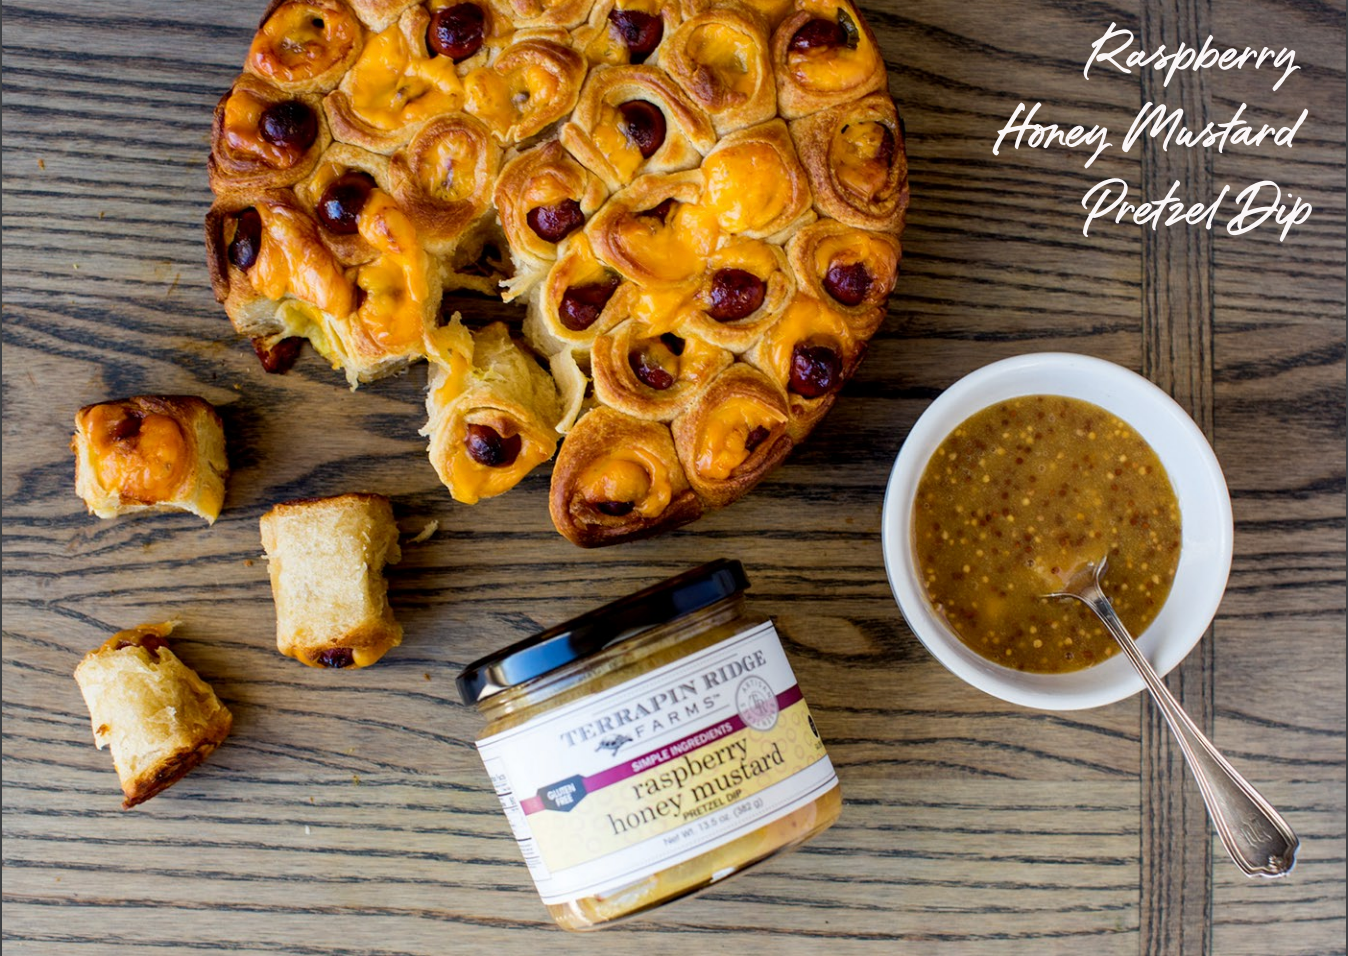 Cheesy Pigs in a Blanket with Raspberry Honey Mustard Dip